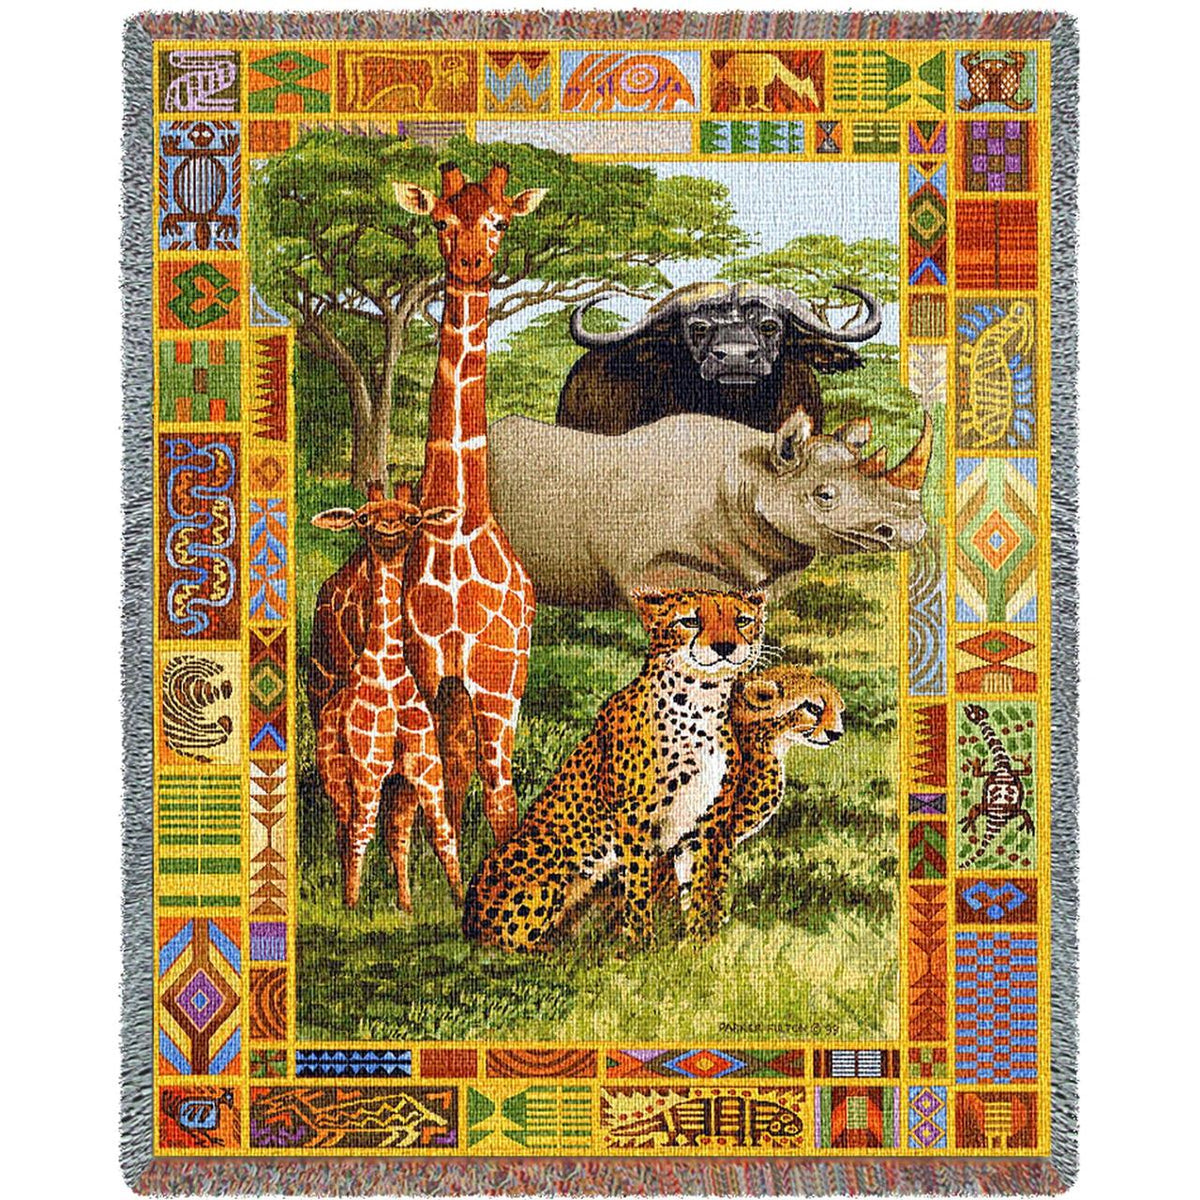 Quilting fabric panel set african animals Baby sewing fabric panels Cotton  panel